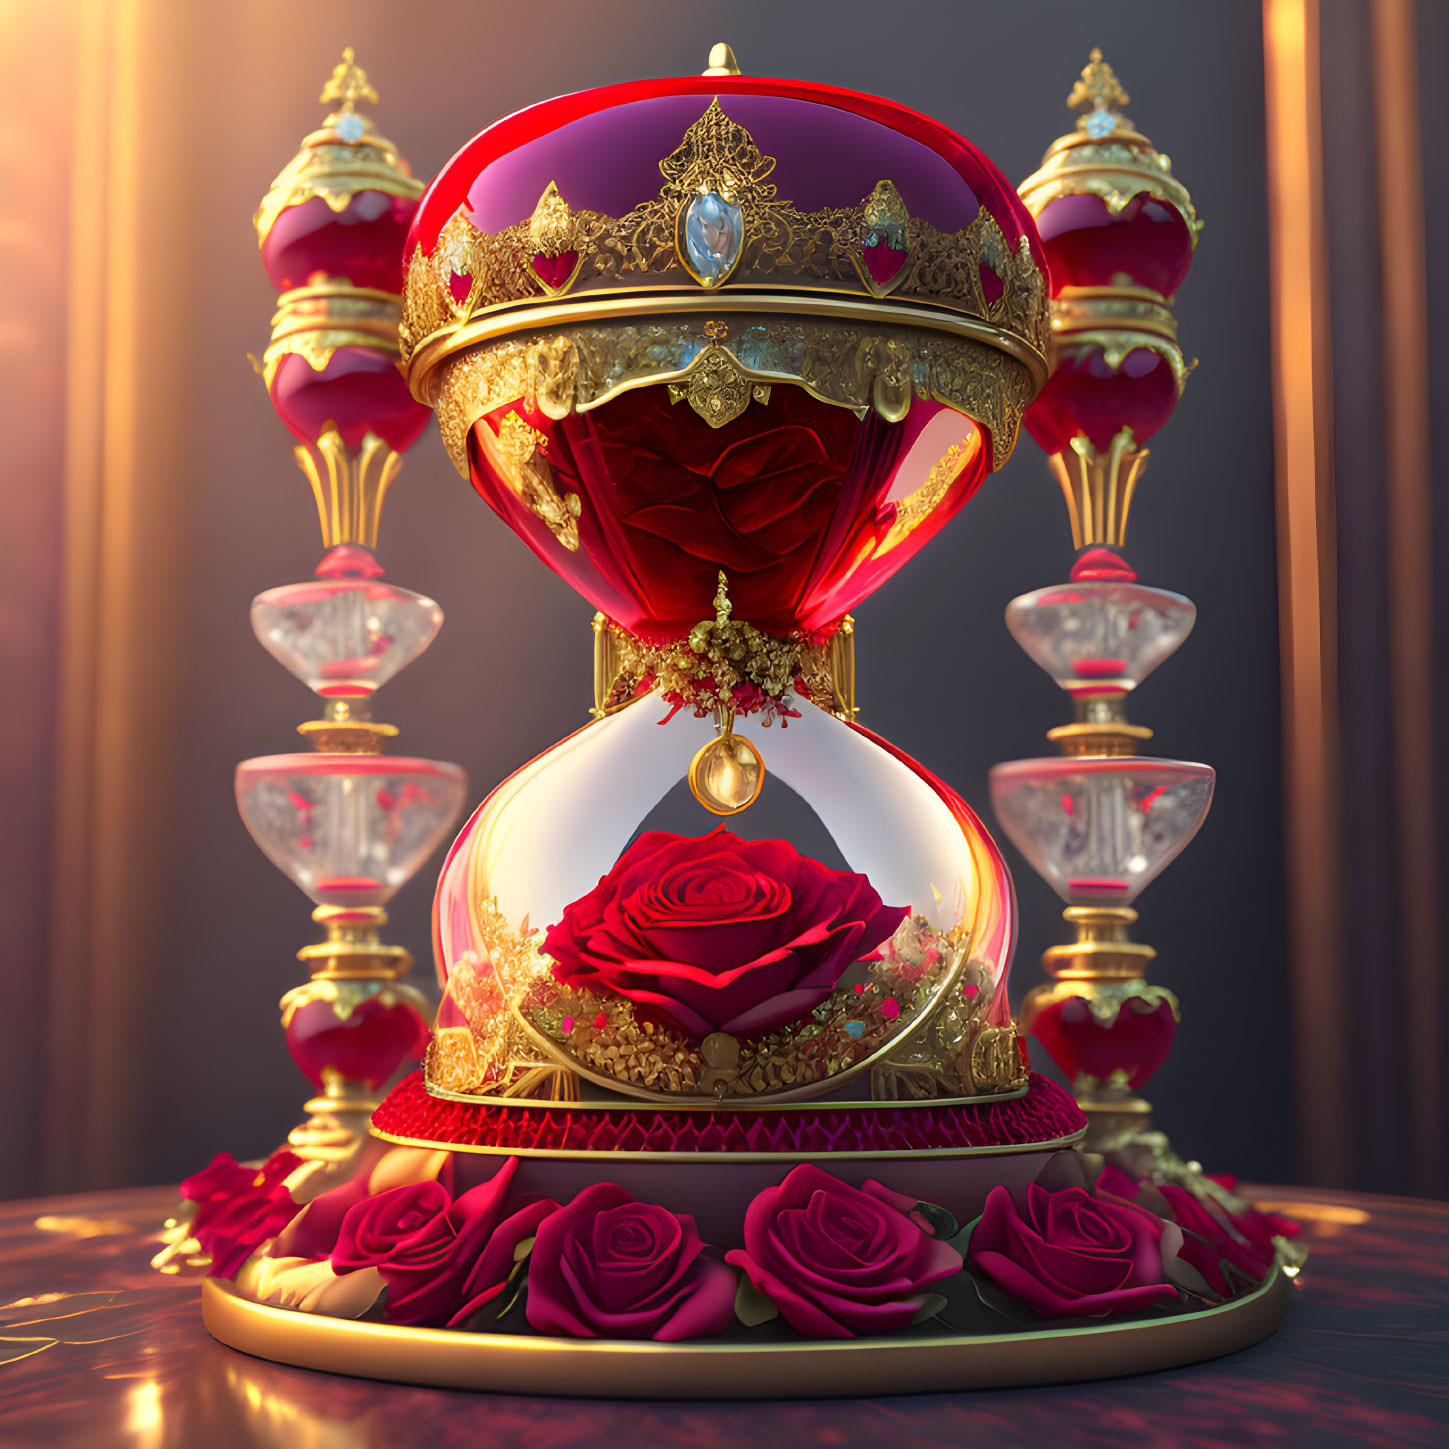 Ornate hourglass with red jewel upper part and rose in lower dome surrounded by smaller hourg